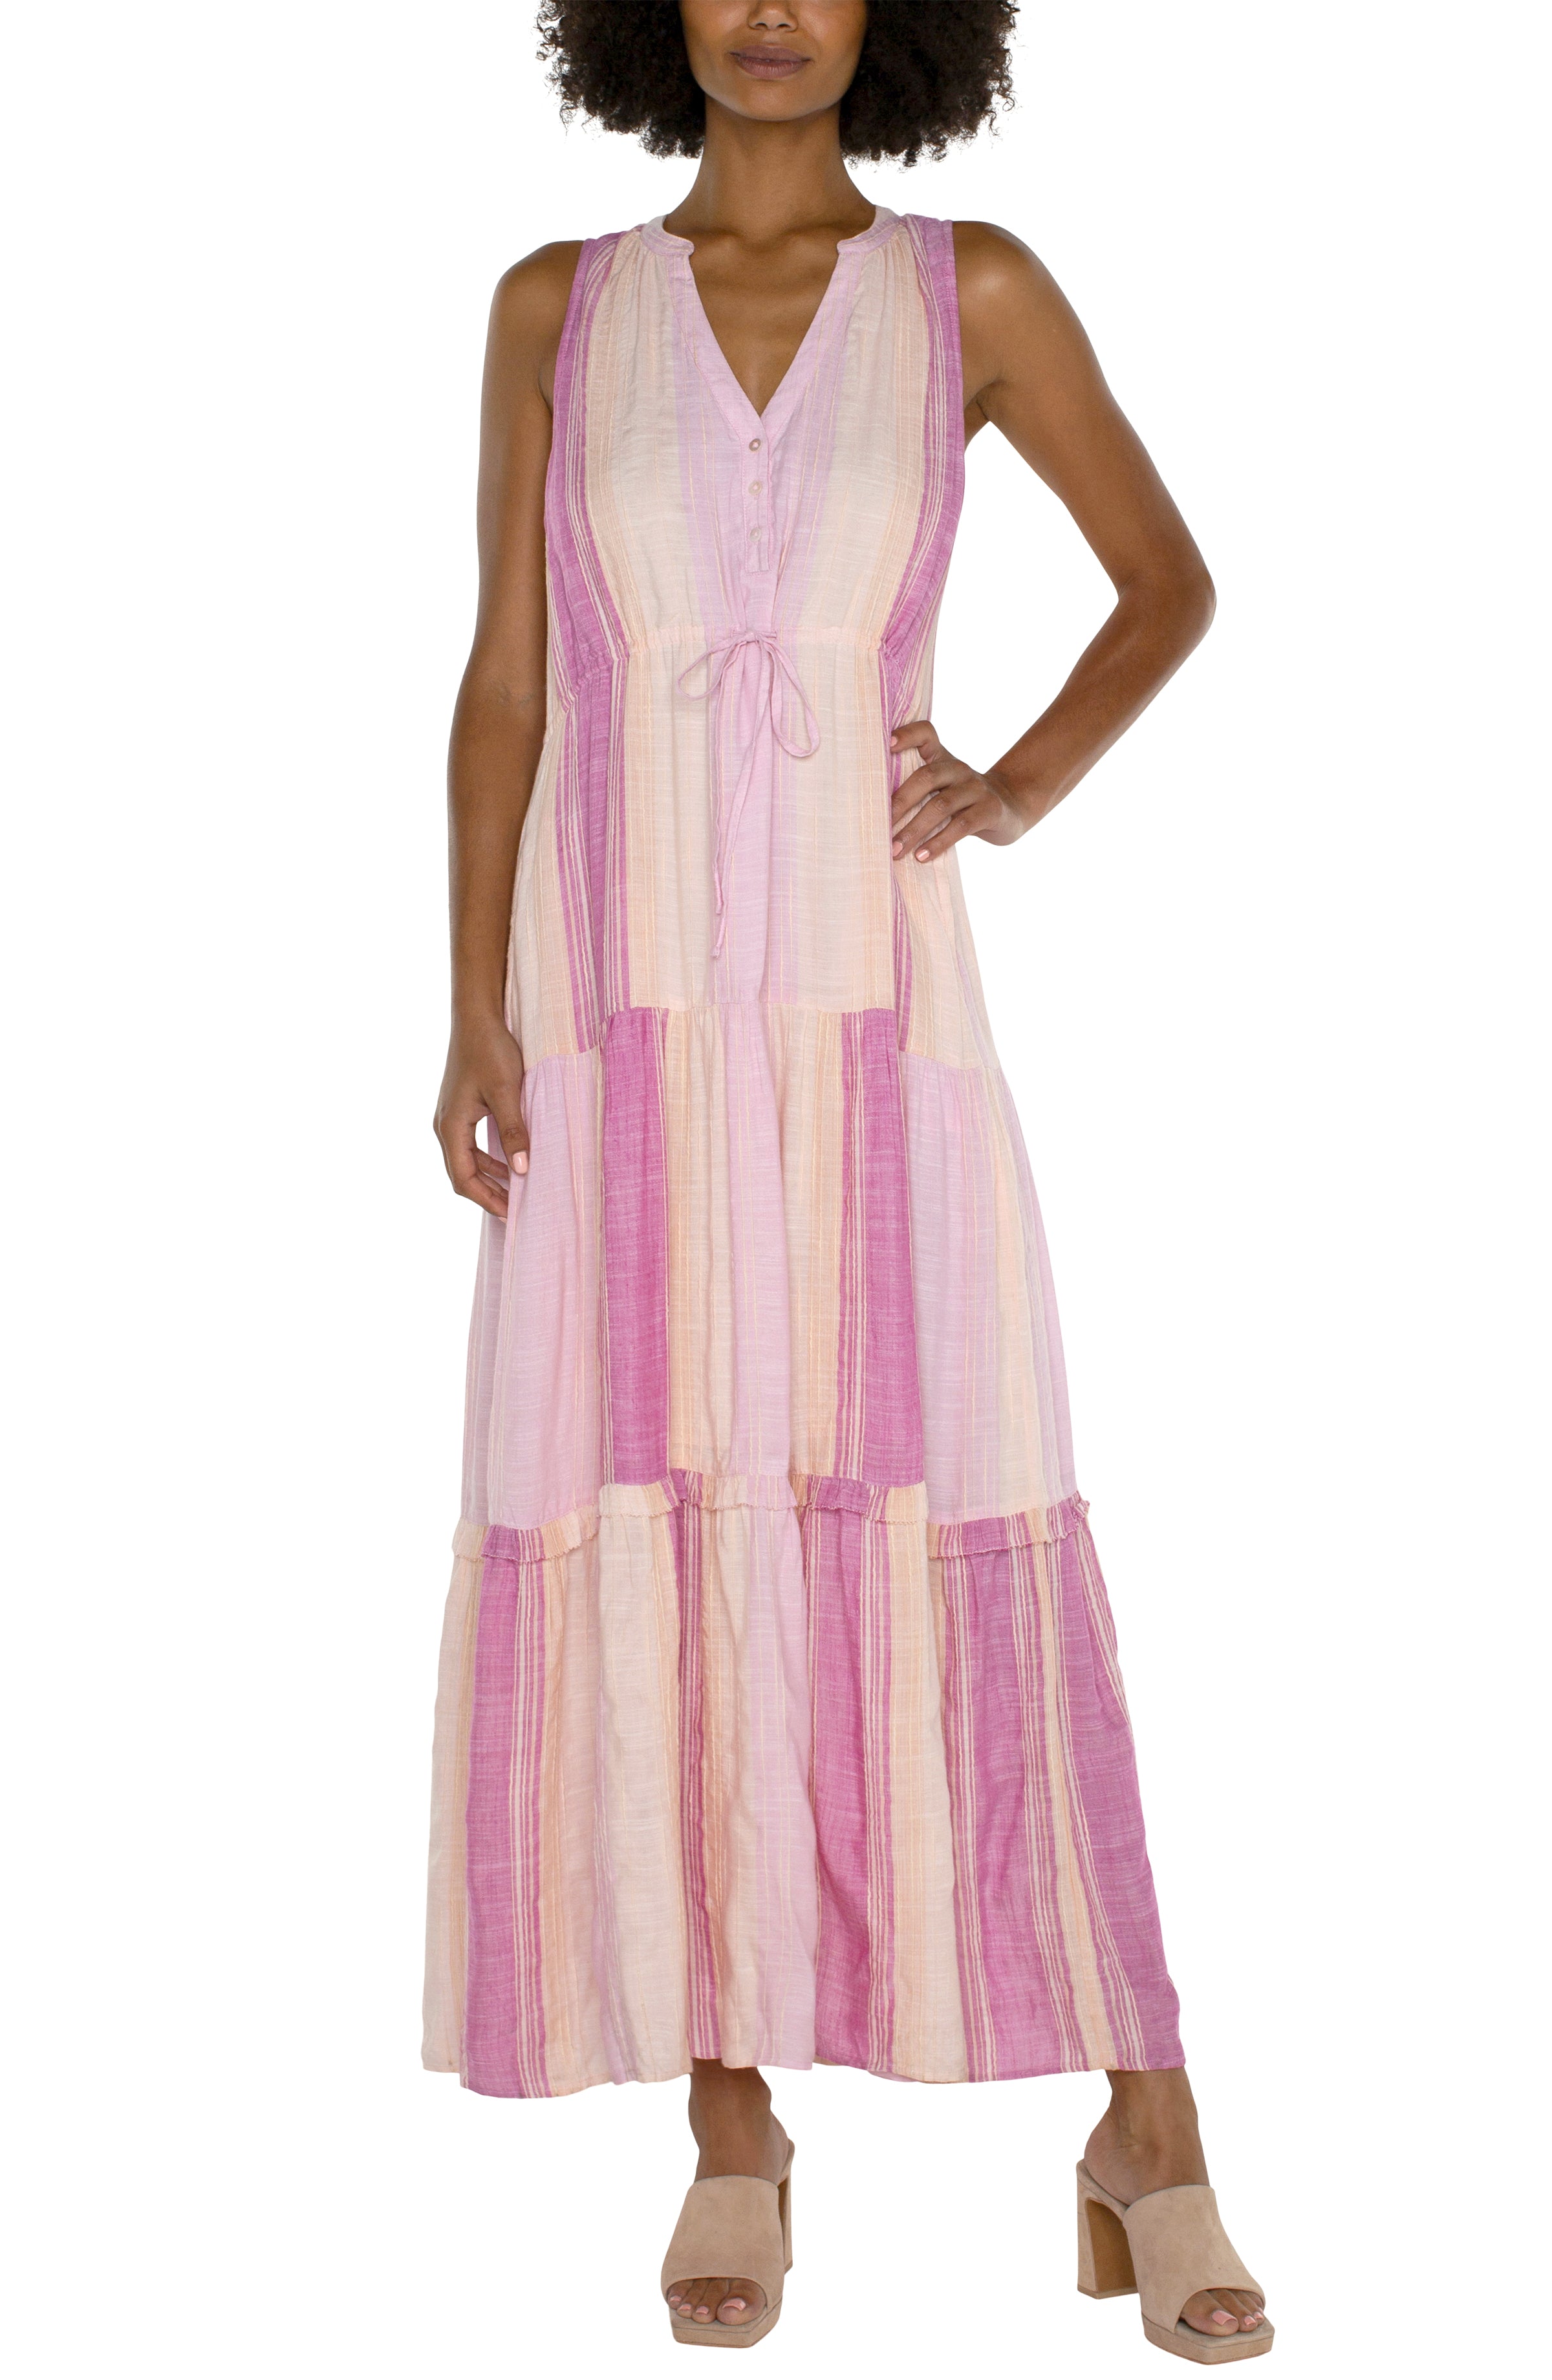 LVP Slvless Tiered Maxi Dress - Lavender Front View